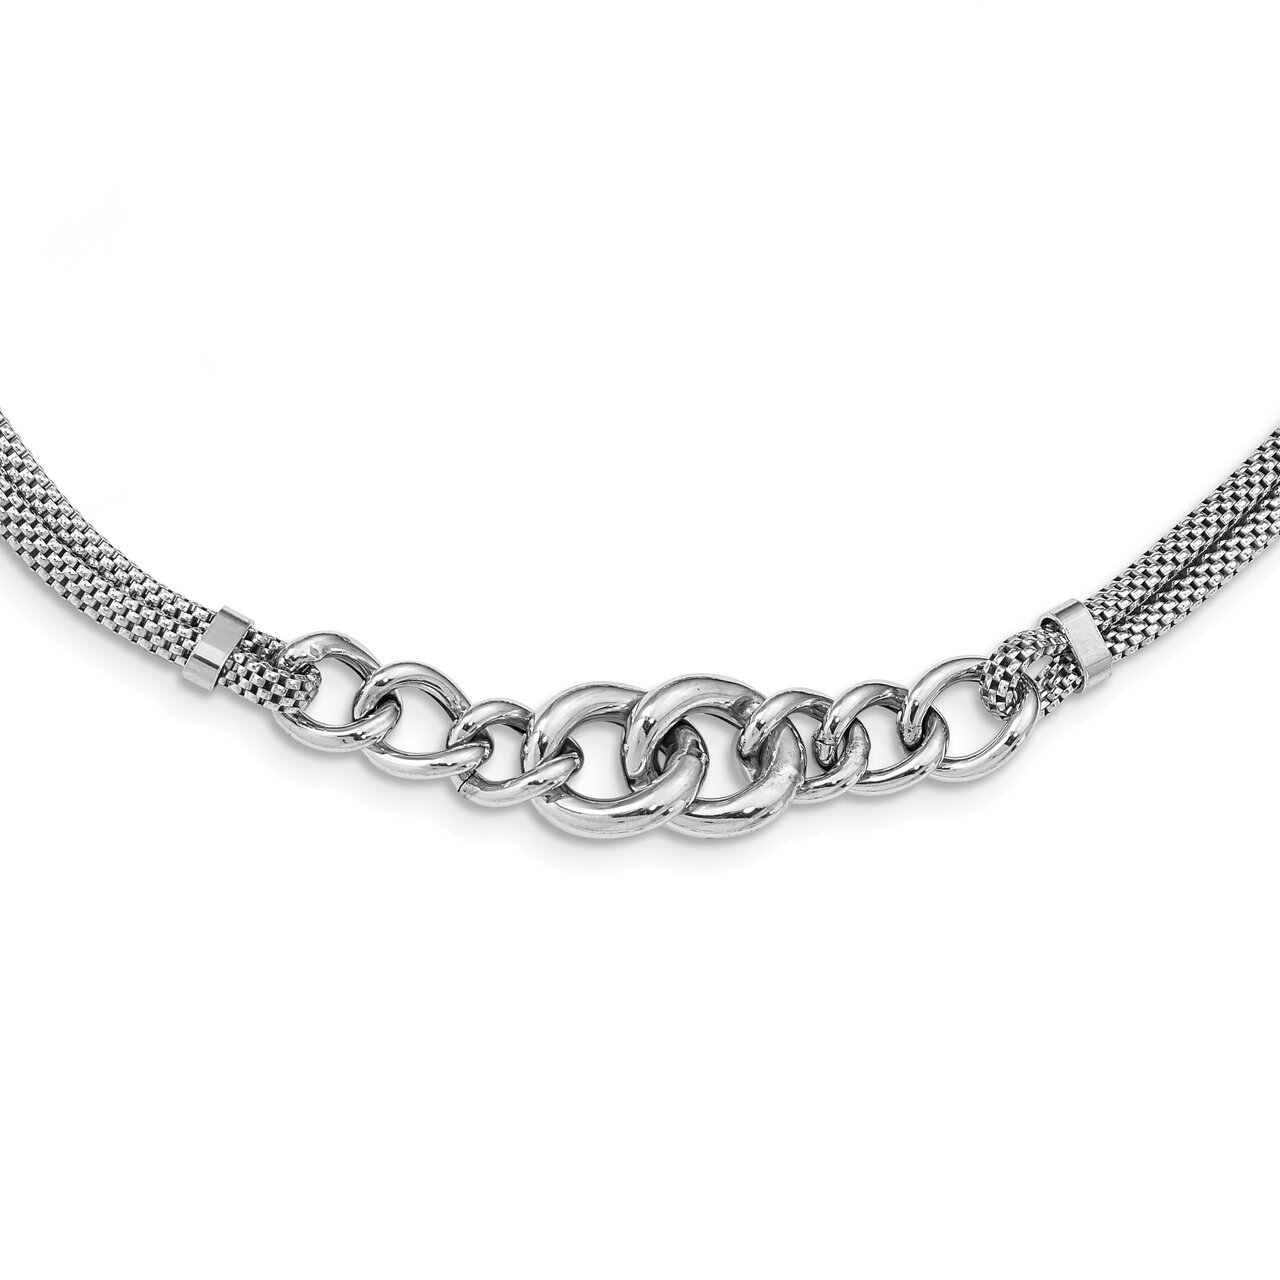 17 Inch Rhodium-plated Fancy Chain w/2in Ext. 2-strand Necklace Sterling Silver QG5599-17